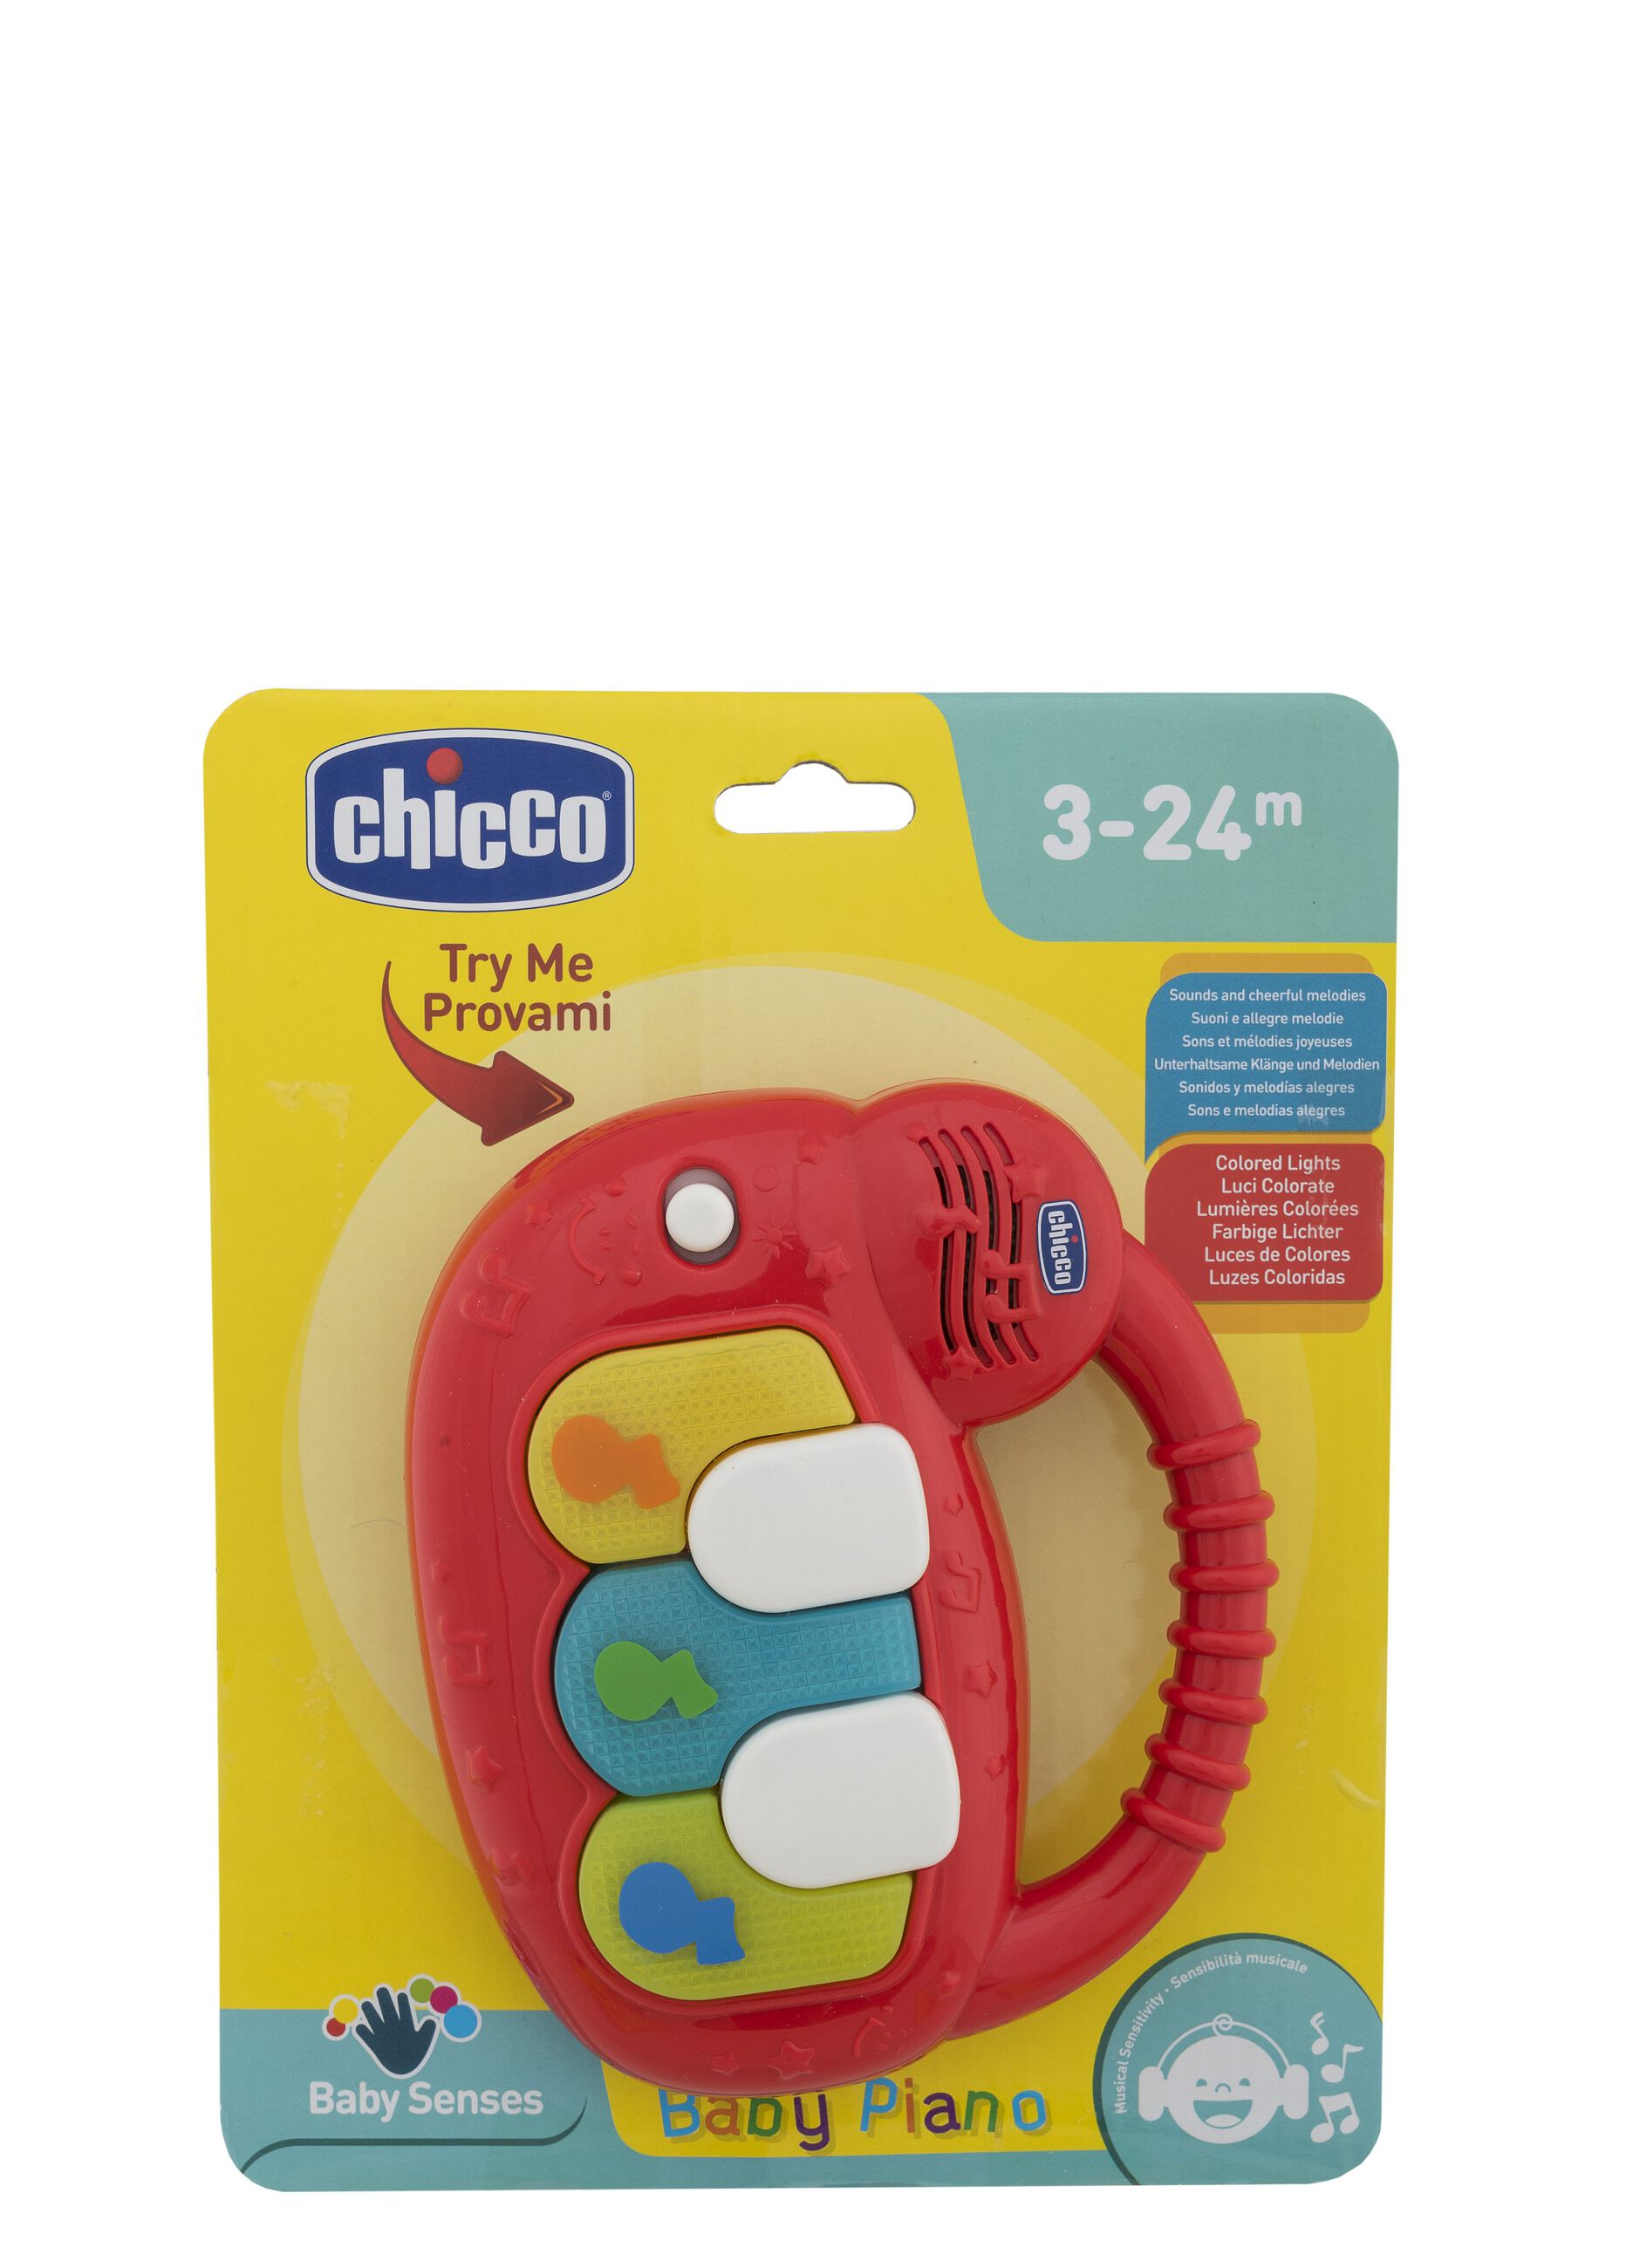 Chicco musical baby piano